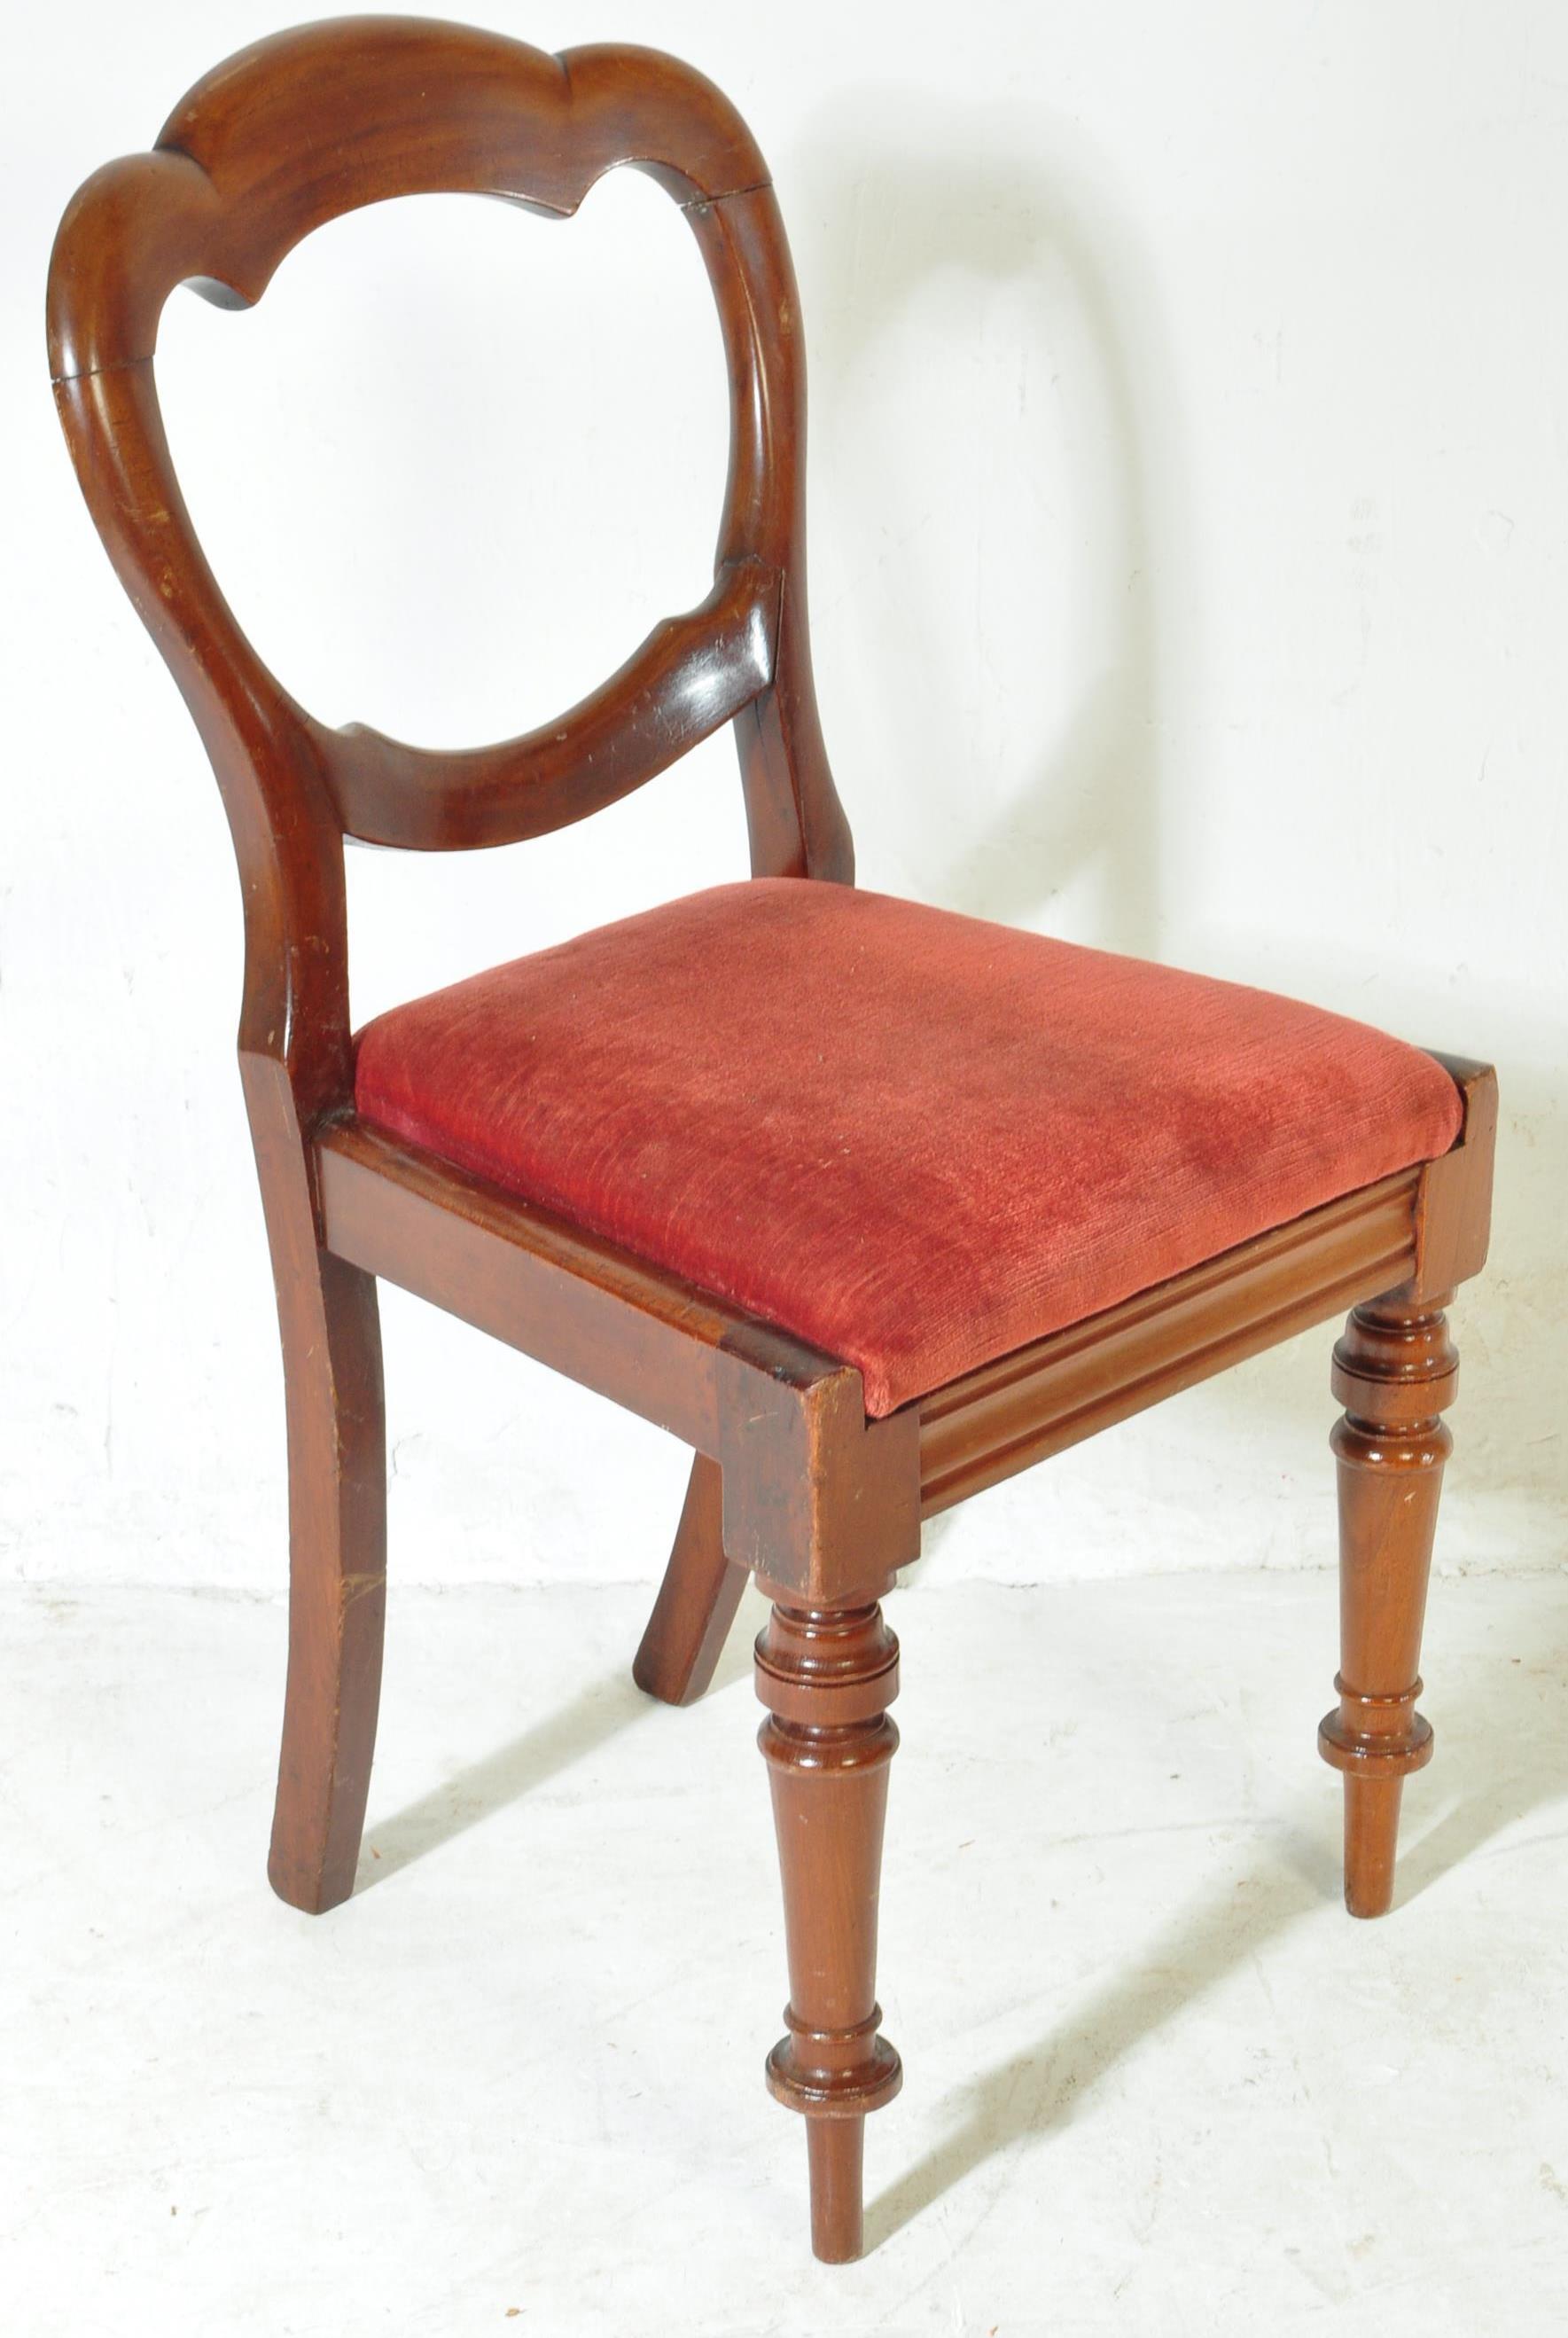 SET OF SIX VICTORIAN MAHOGANY SCALLOP BACK DINING CHAIRS - Image 4 of 4